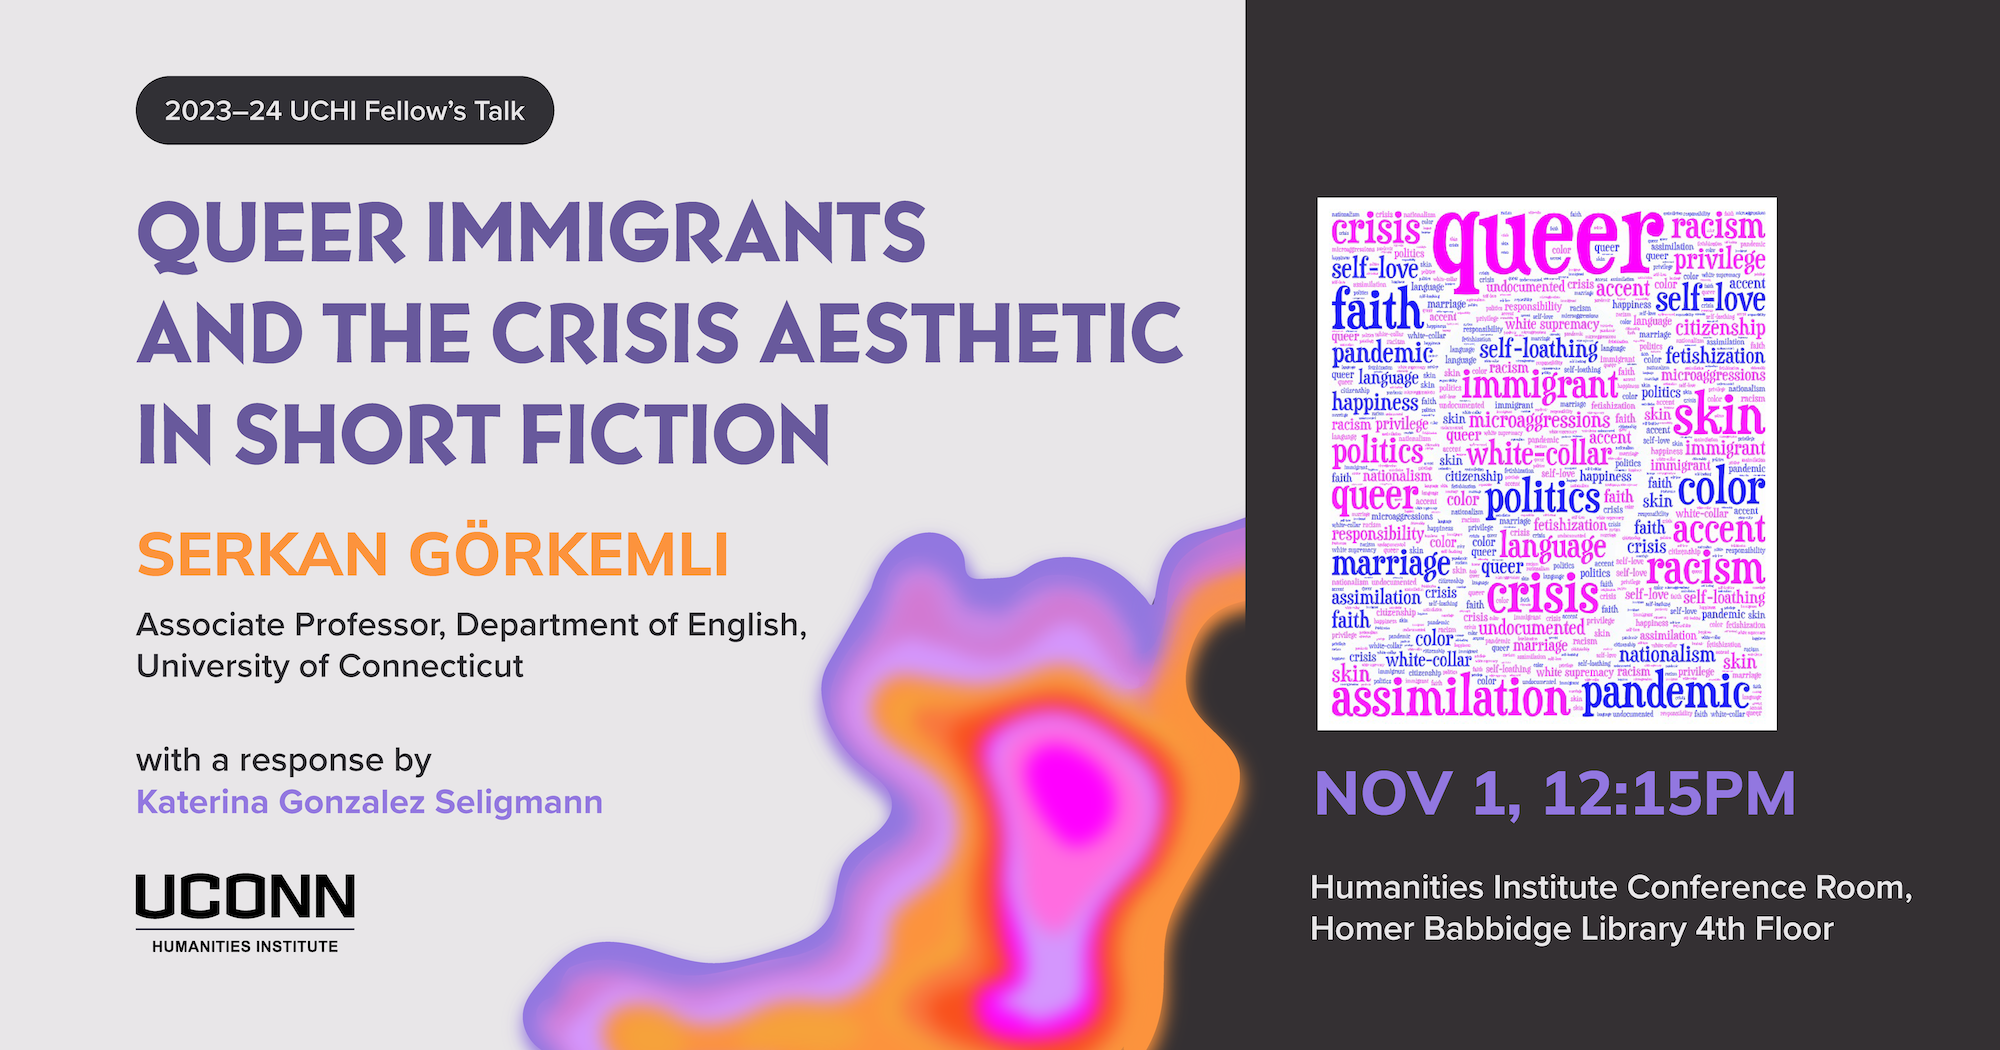 2023–24 UCHI Fellow's Talk. "Queer Immigrants and the Crisis Aesthetic in Short Fiction" Serkan Gorkelmi, Associate Professor, Department of English, UConn. with a response by Katerina Gonzalez Seligmann. November 1, 12:15pm, UCHI conference room, Homer Babbidge Library, fourth floor.